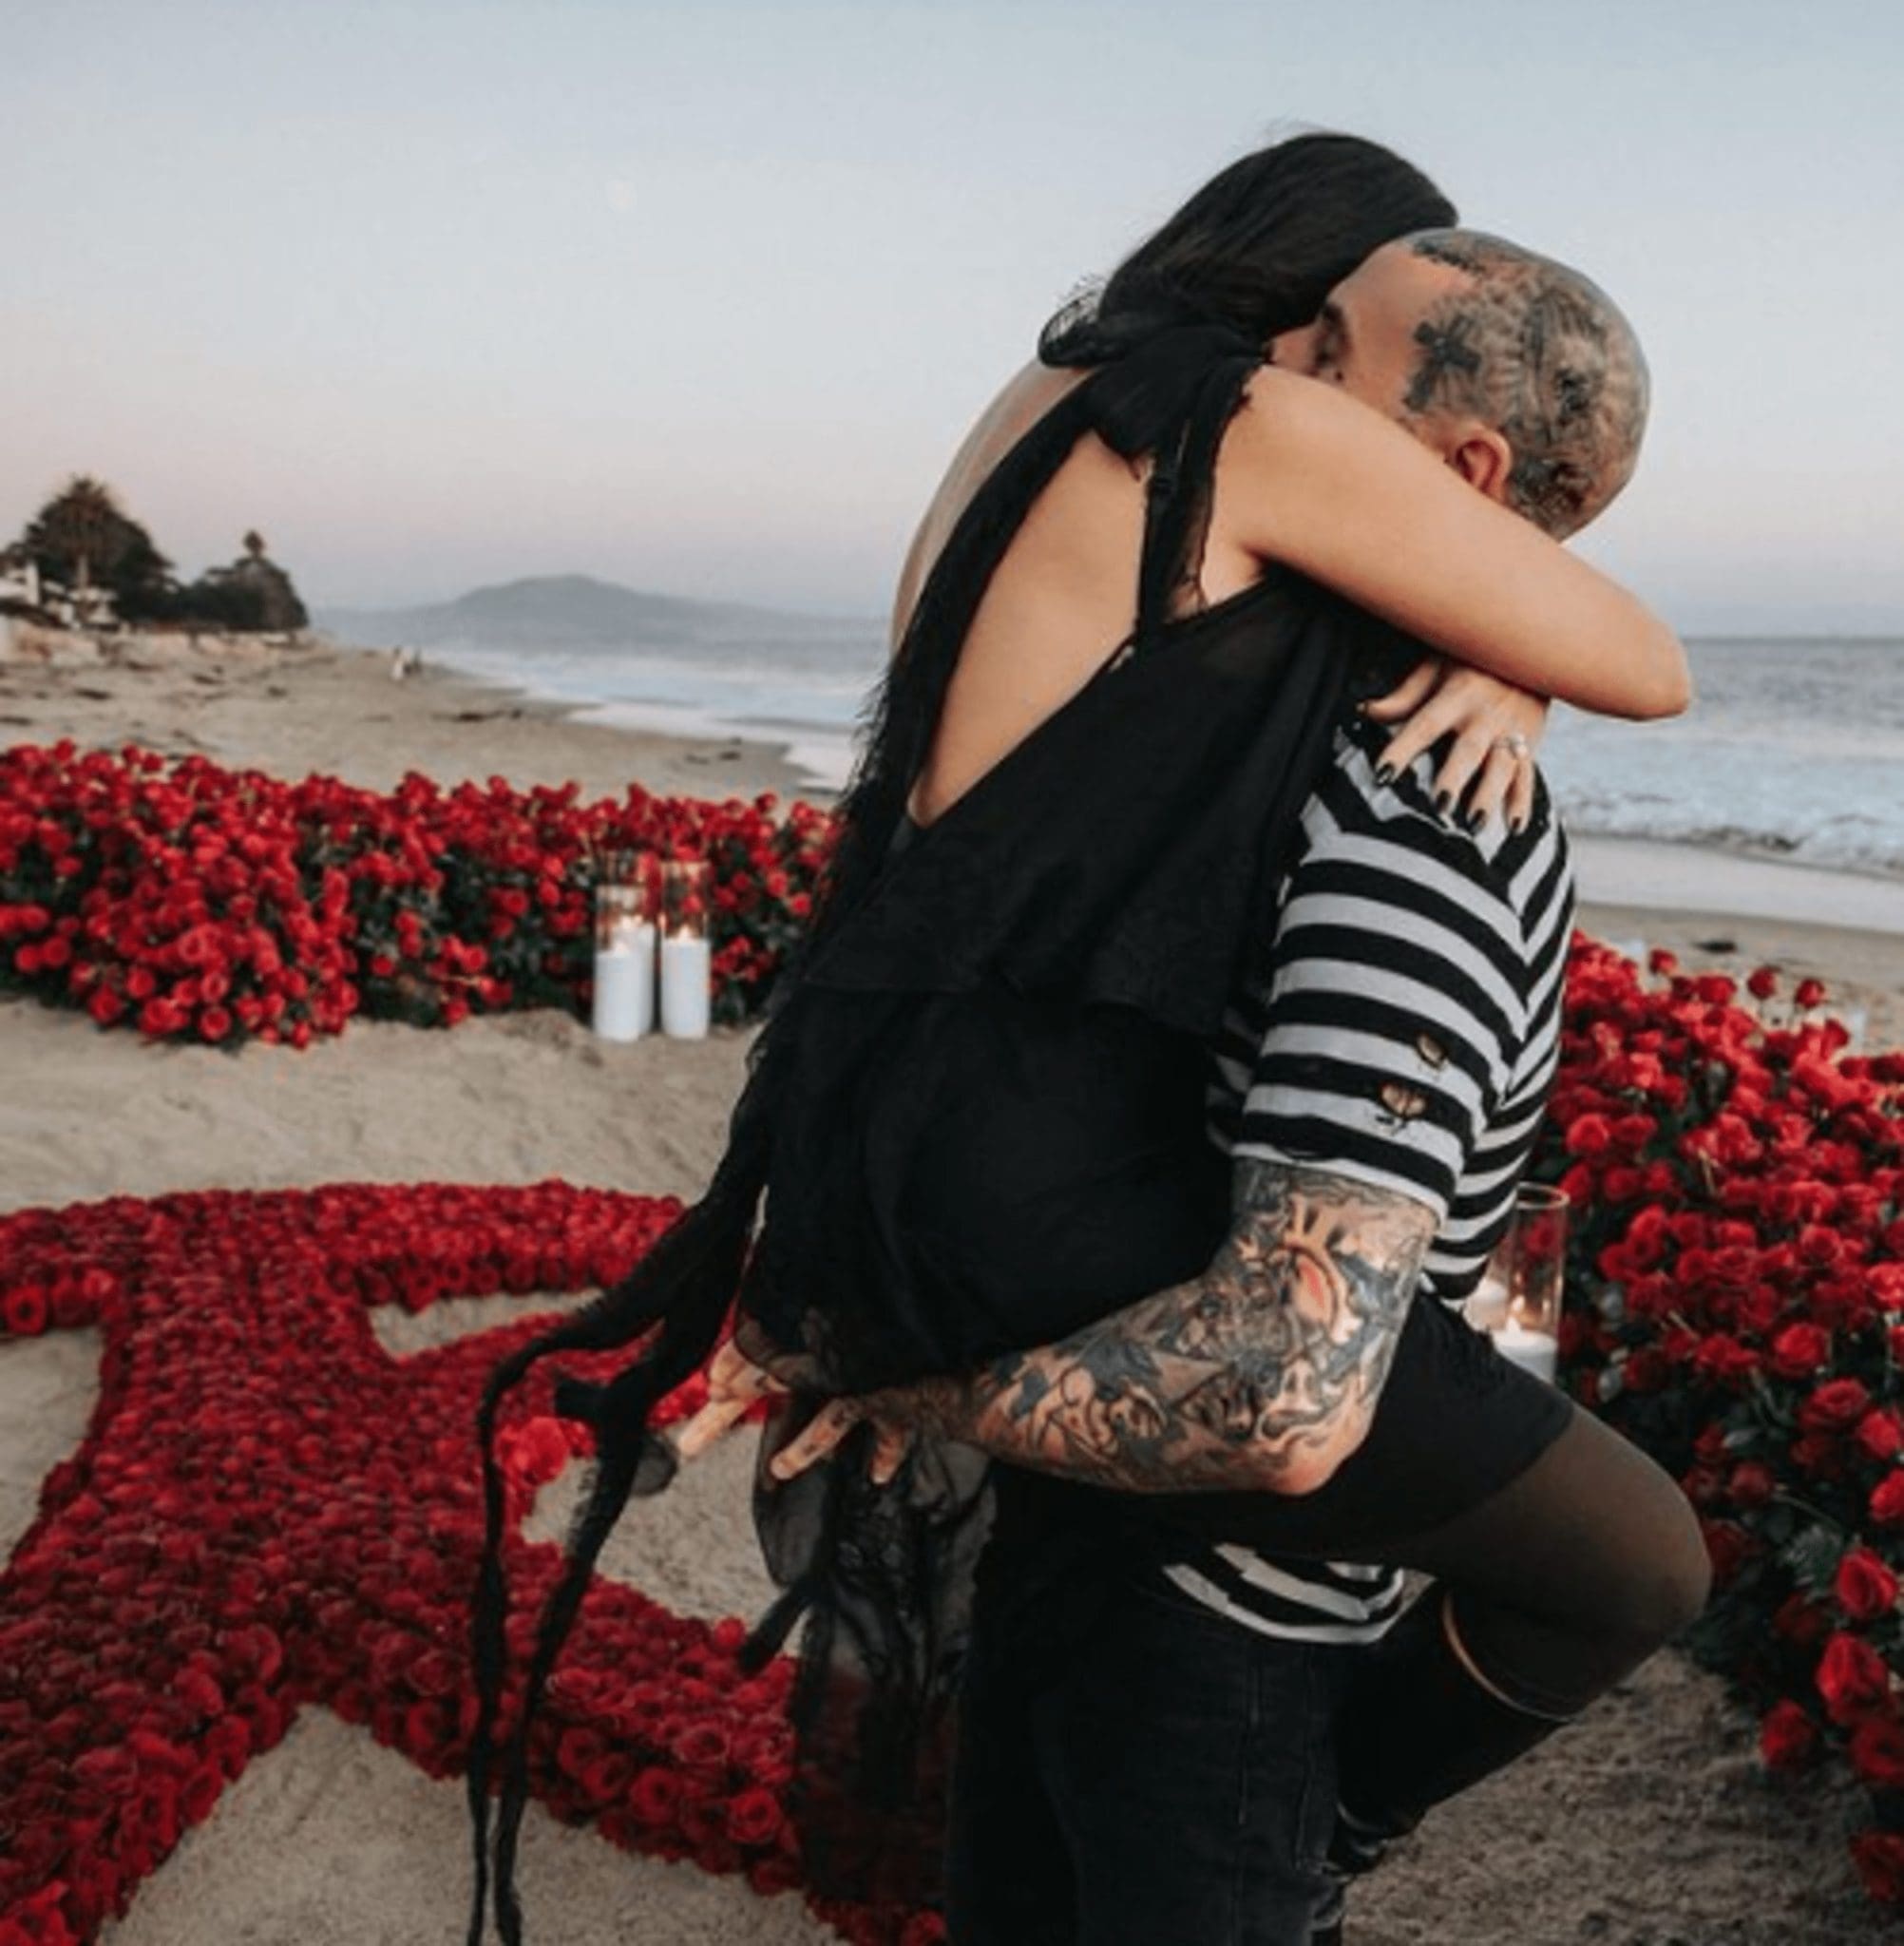 On the one year anniversary of Travis Barker's proposal, Kourtney Kardashian threw a celebration complete with throwback photos.